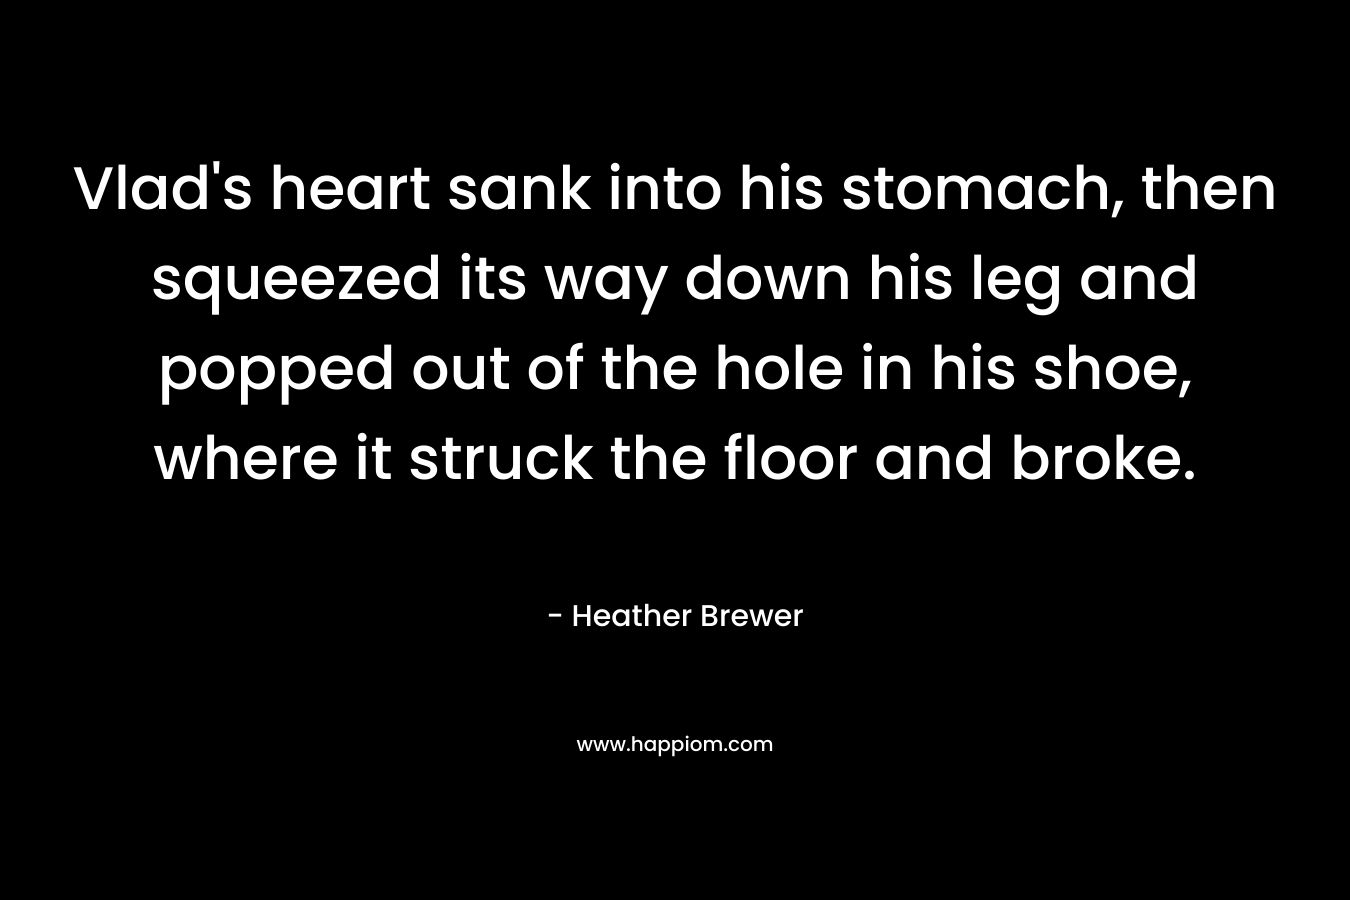 Vlad’s heart sank into his stomach, then squeezed its way down his leg and popped out of the hole in his shoe, where it struck the floor and broke. – Heather Brewer